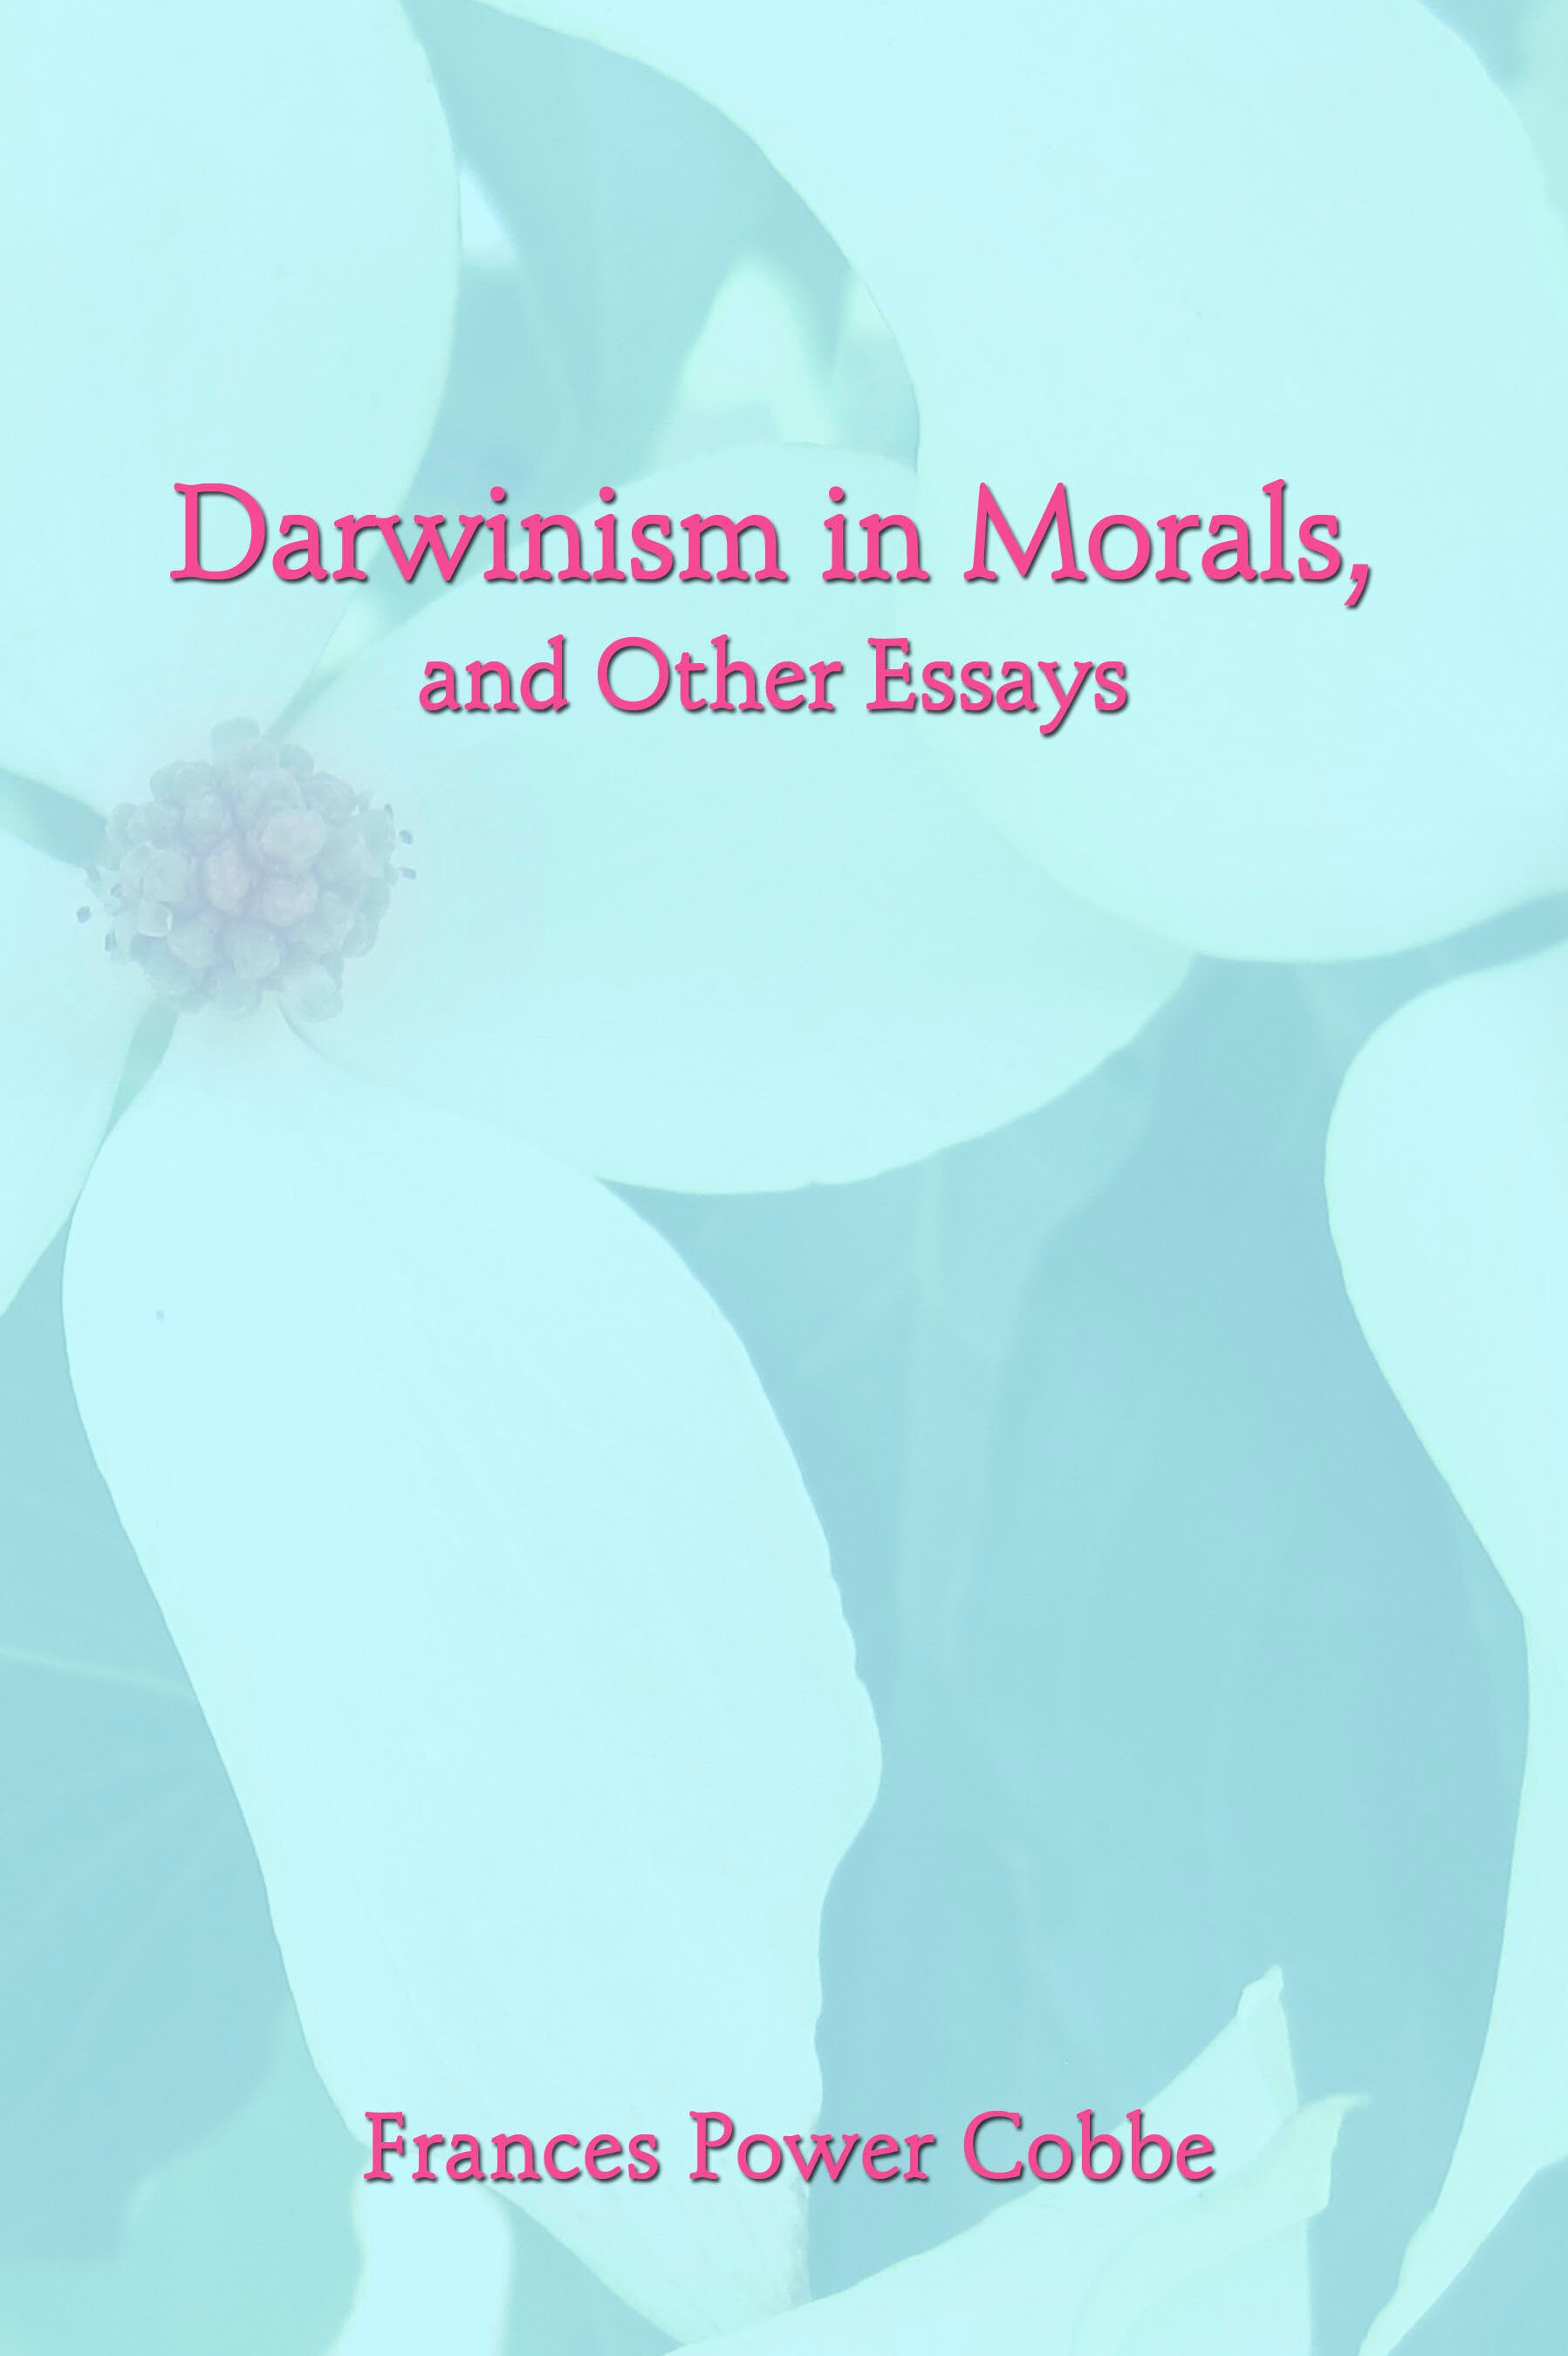 Darwinism in Morals and other Essays